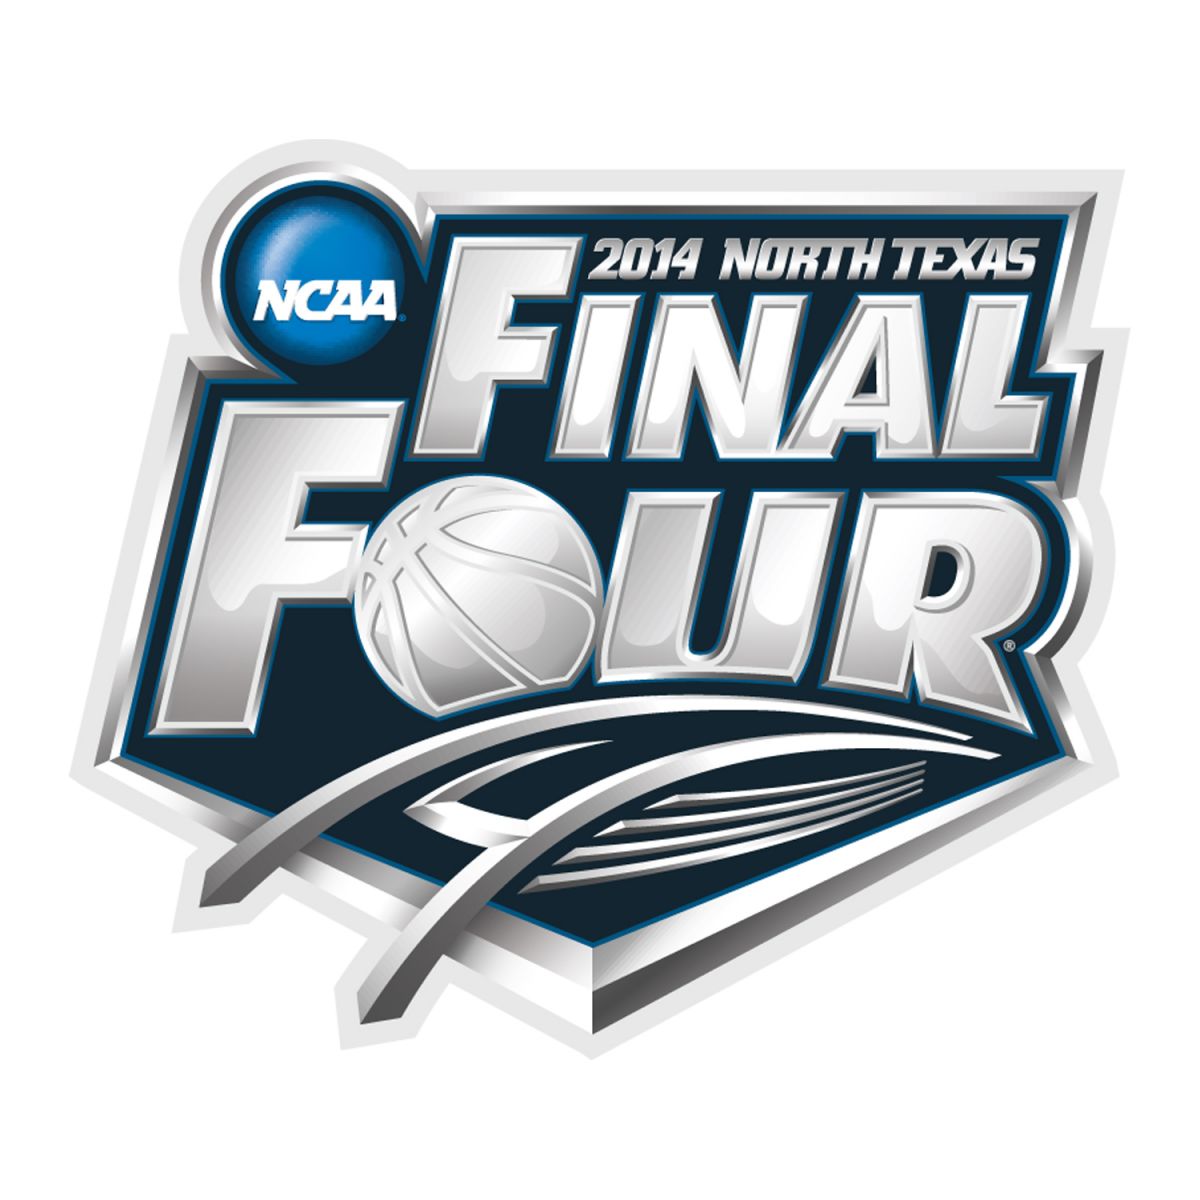 The Final Four is in North Texas. What the heck is North Texas? For